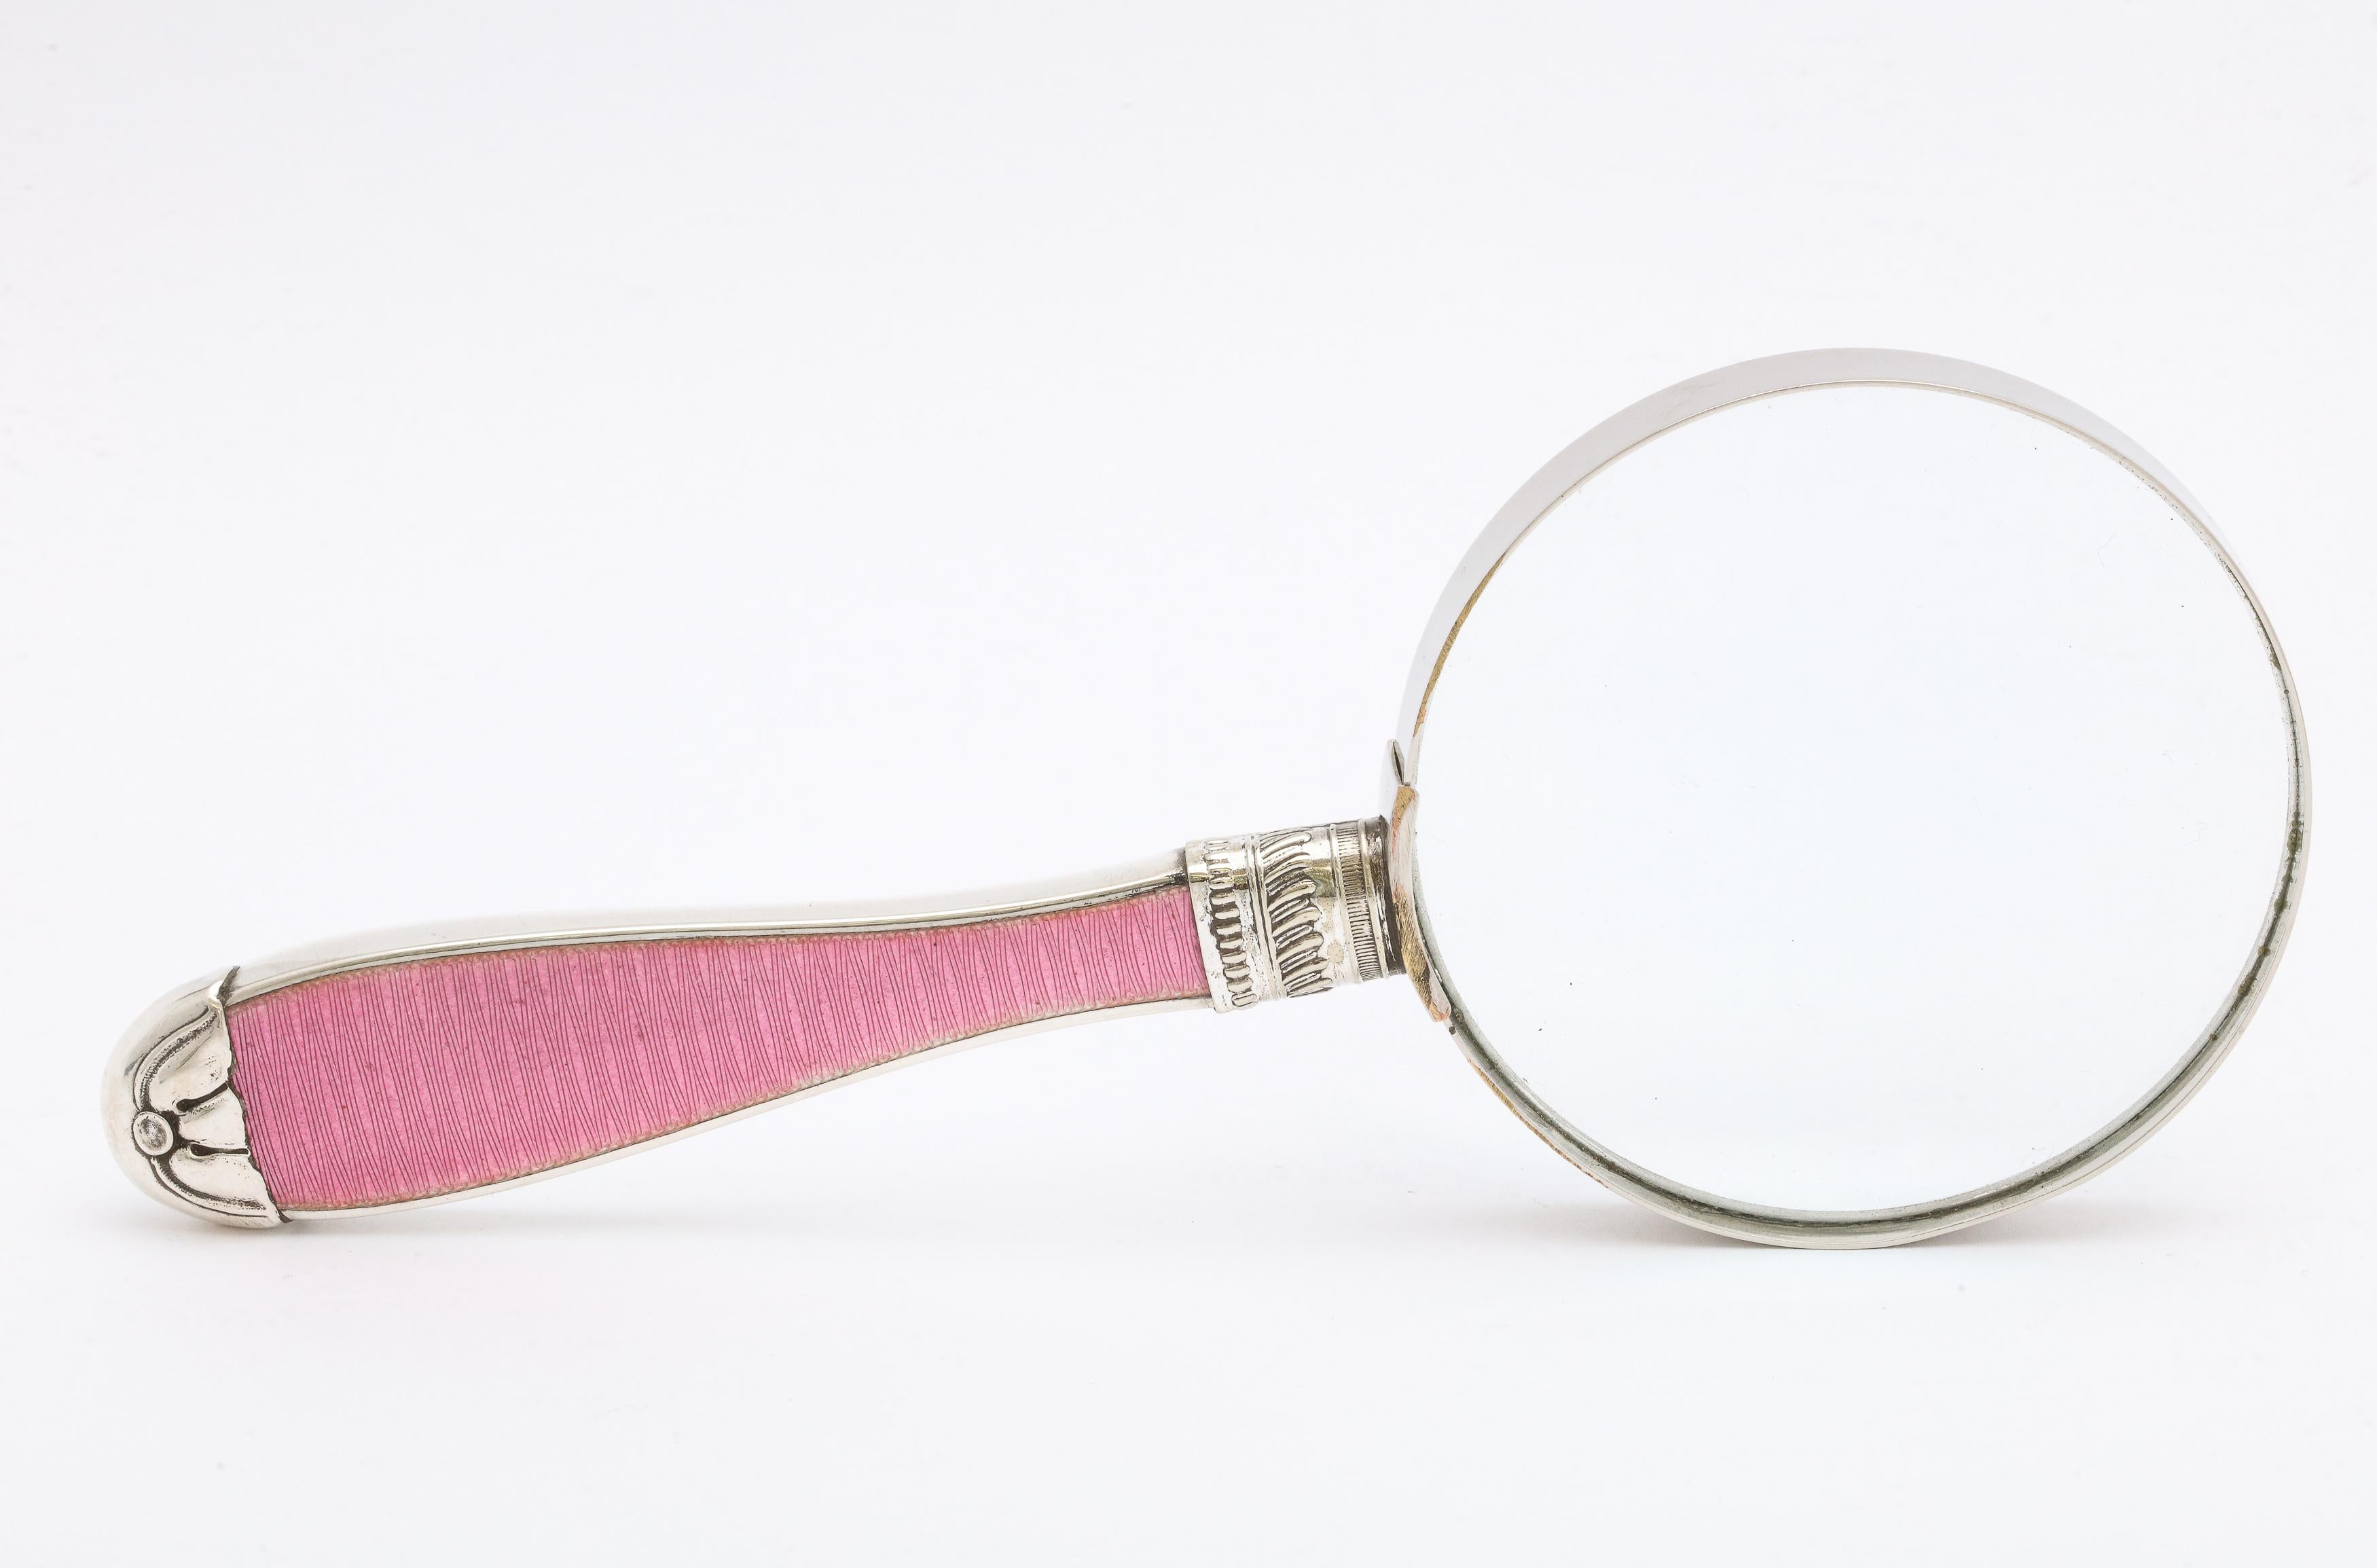 English Art Deco Sterling Silver and Deep Pink Enamel-Mounted Magnifying Glass